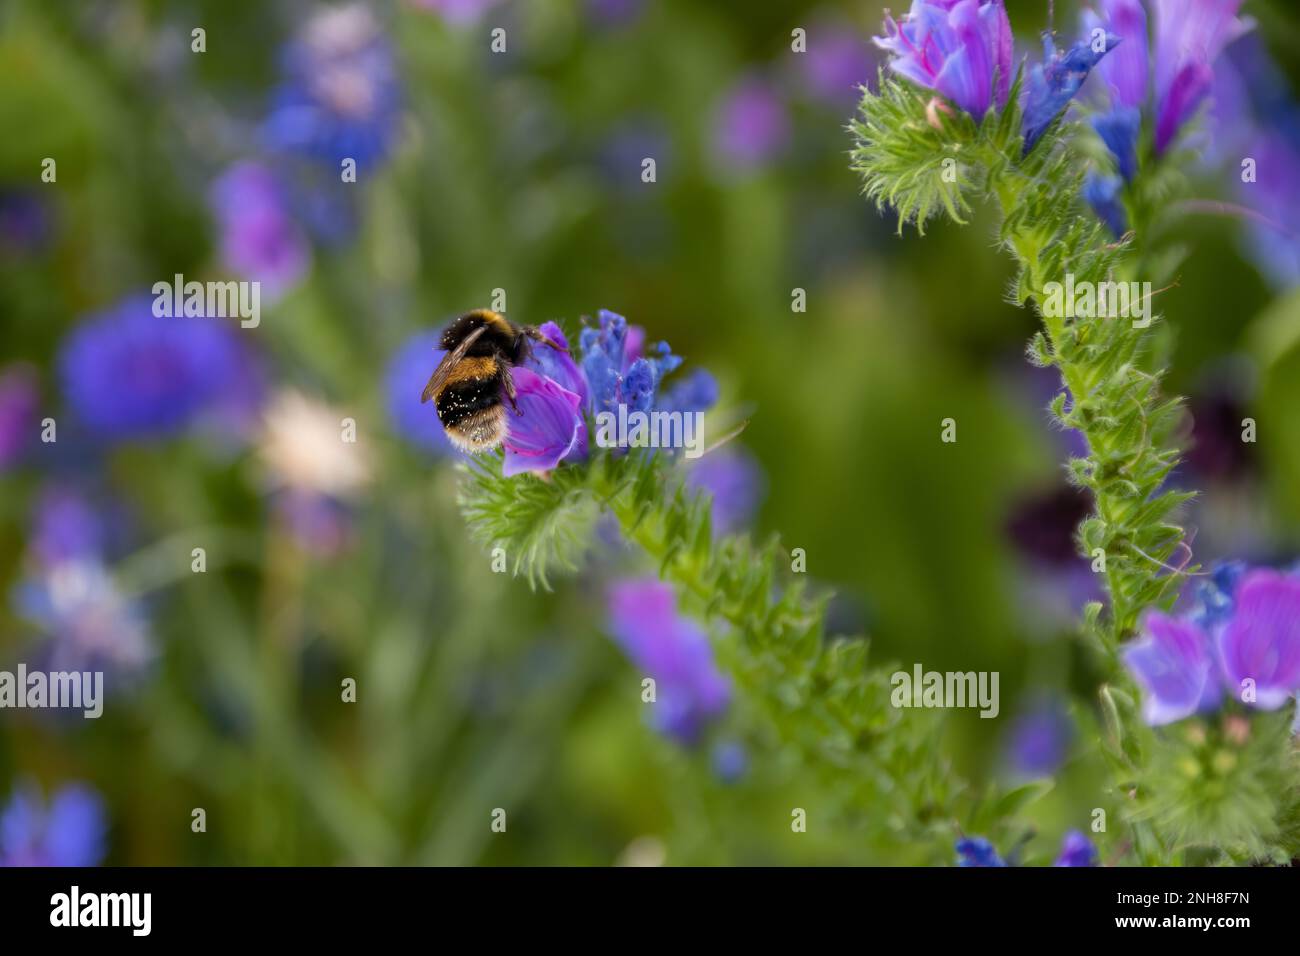 buff tailed bumblebee collecting pollen from pretty blue and pink flowers of Viper's Bugloss Echium Vulgare with a background of blurred colourful wil Stock Photo